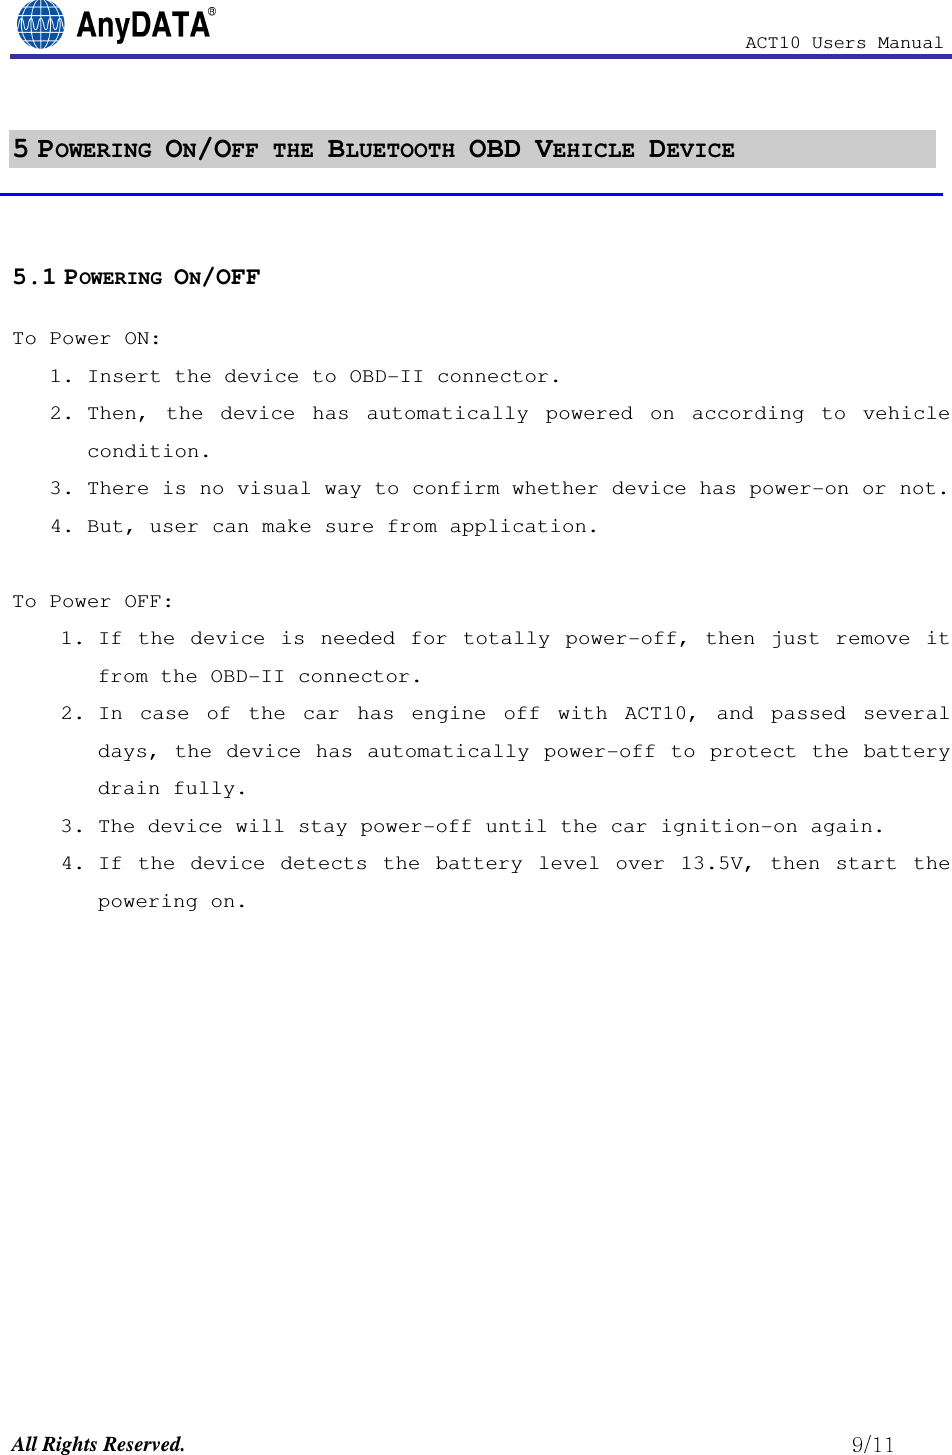                                                            ACT10 Users Manual  All Rights Reserved.                                                          5 POWERING ON/OFF THE BLUETOOTH OBD VEHICLE DEVICE  5.1 POWERING ON/OFF To Power ON:  1. Insert the device to OBD-II connector.  2. Then,  the  device  has  automatically  powered  on  according  to  vehicle condition. 3. There is no visual way to confirm whether device has power-on or not.  4. But, user can make sure from application.  To Power OFF: 1. If  the  device  is  needed  for  totally  power-off,  then  just  remove  it from the OBD-II connector. 2. In  case  of  the  car  has  engine  off  with  ACT10,  and  passed  several days, the device has automatically power-off to protect the battery drain fully.  3. The device will stay power-off until the car ignition-on again.  4. If  the  device  detects  the  battery  level  over  13.5V,  then  start  the powering on.            